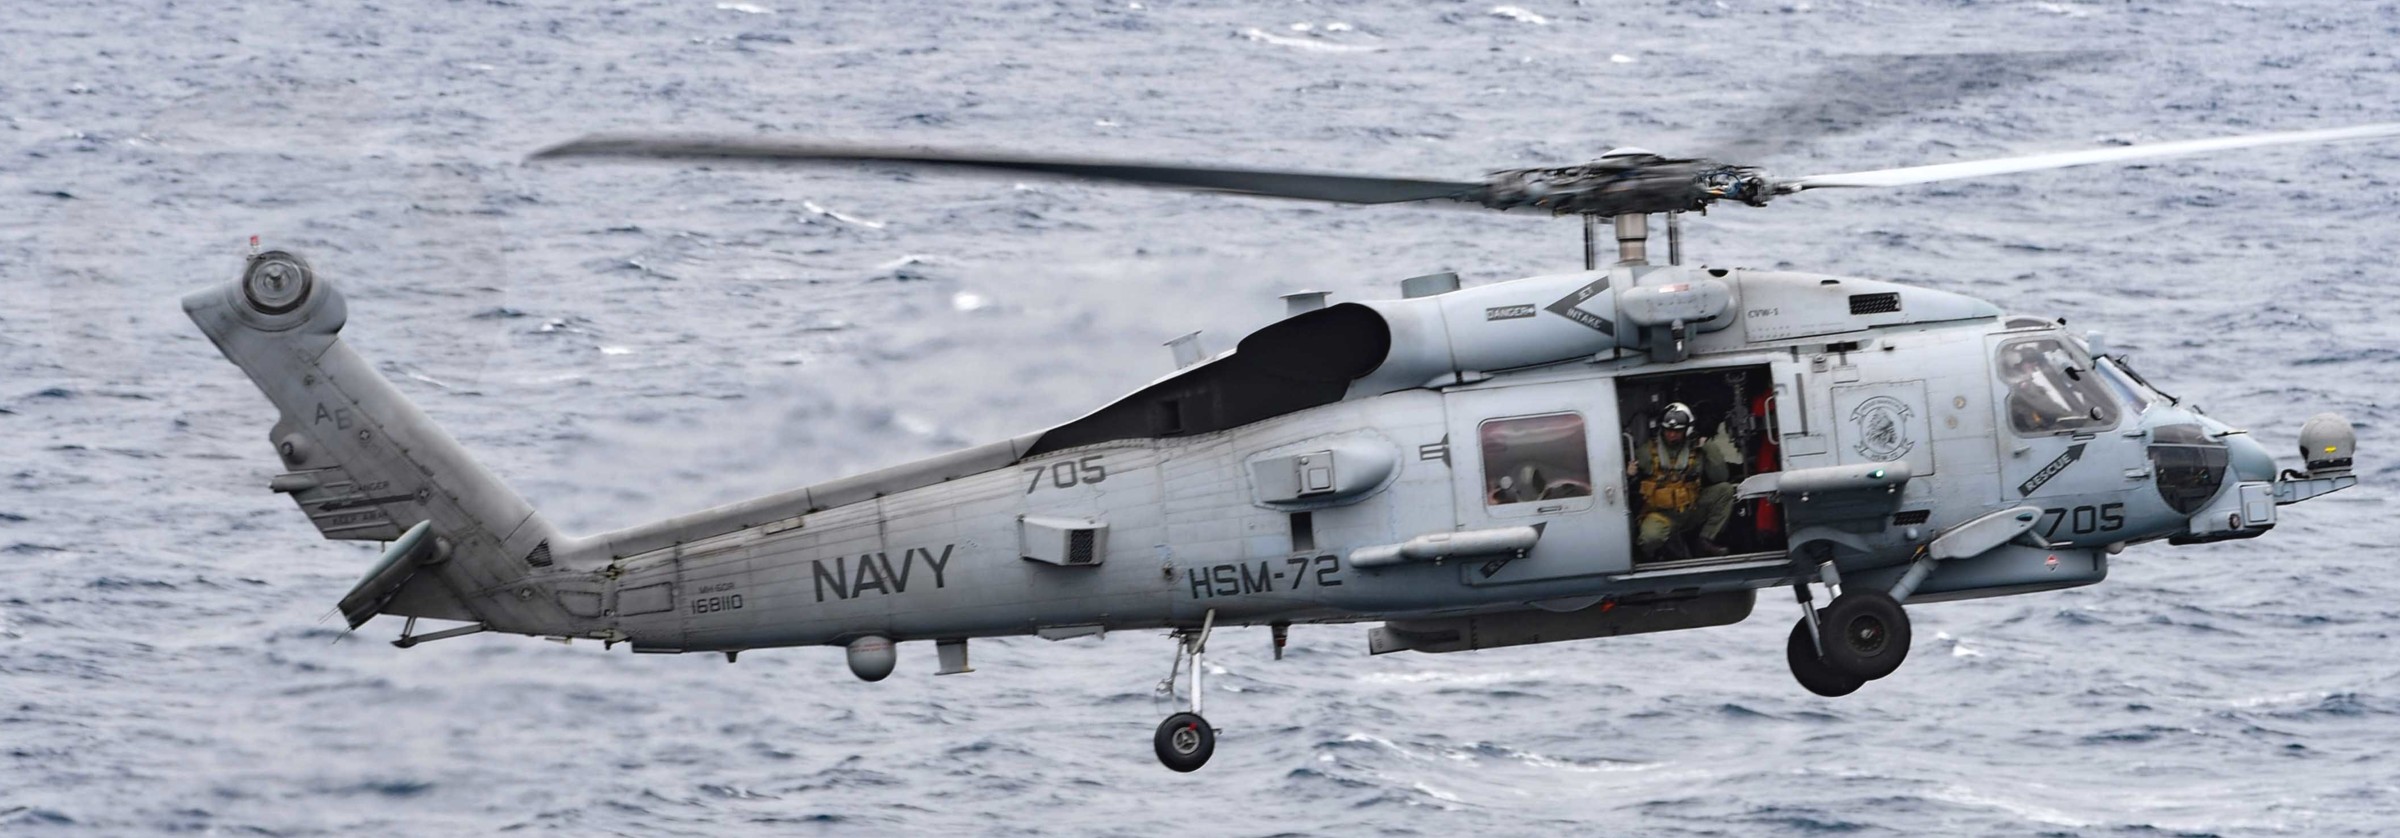 hsm-72 proud warriors helicopter maritime strike squadron mh-60r seahawk carrier air wing cvw-1 cvn-75 uss harry s. truman 46